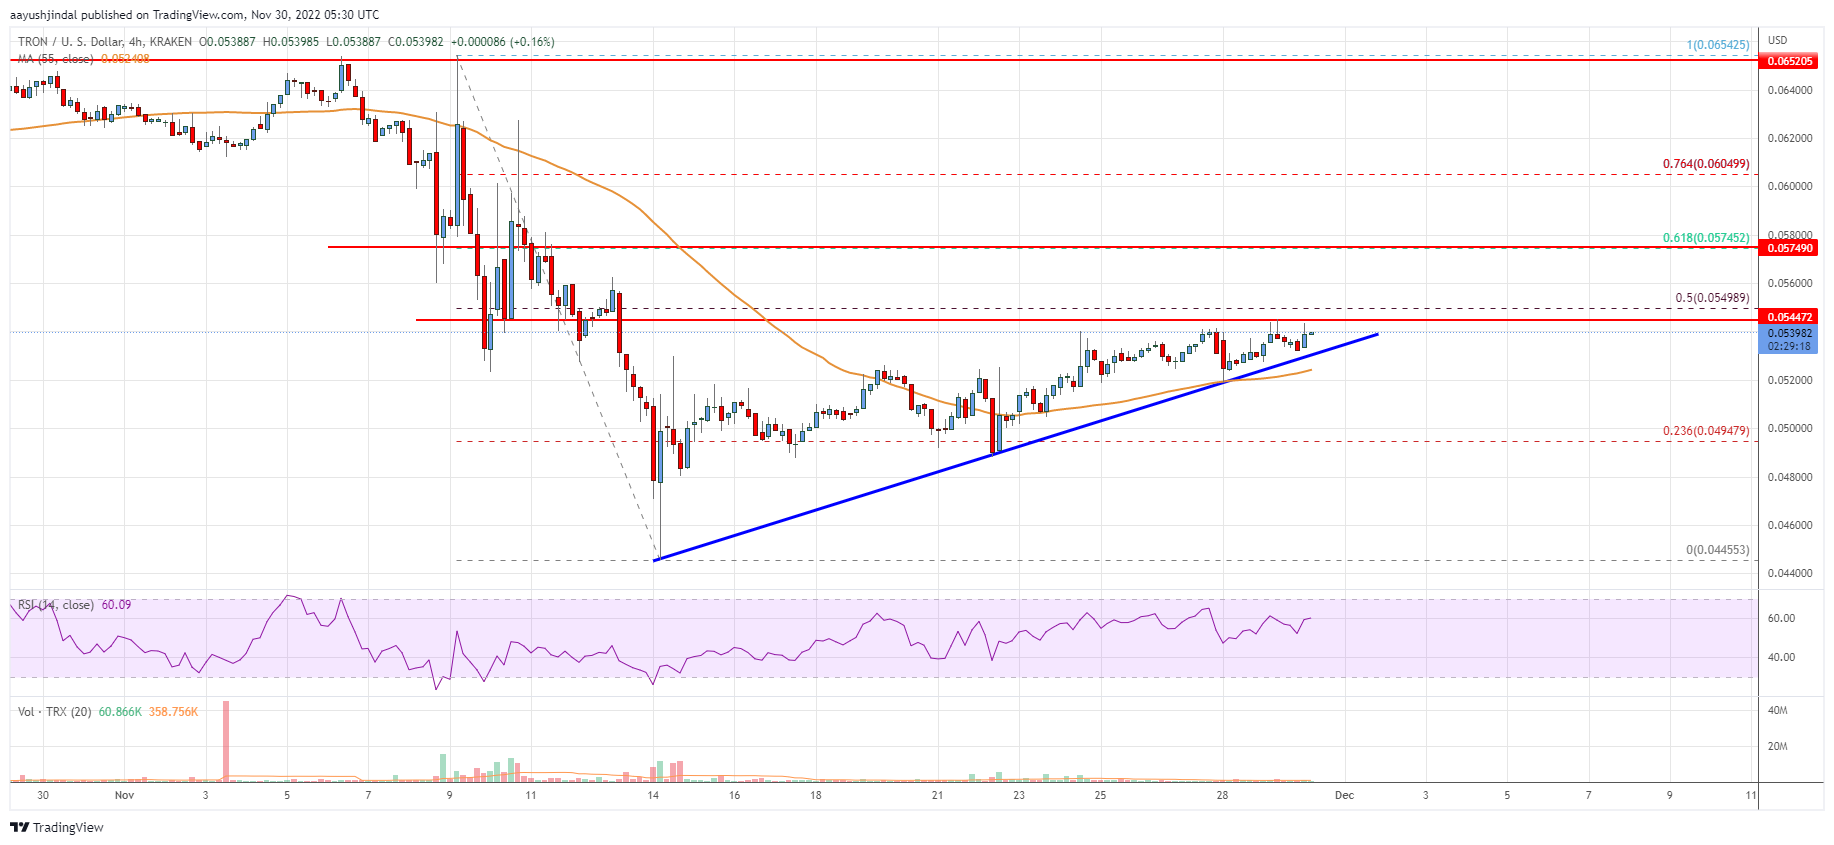 Tron (TRX) Price Analysis: More Gains If It Clears $0.055